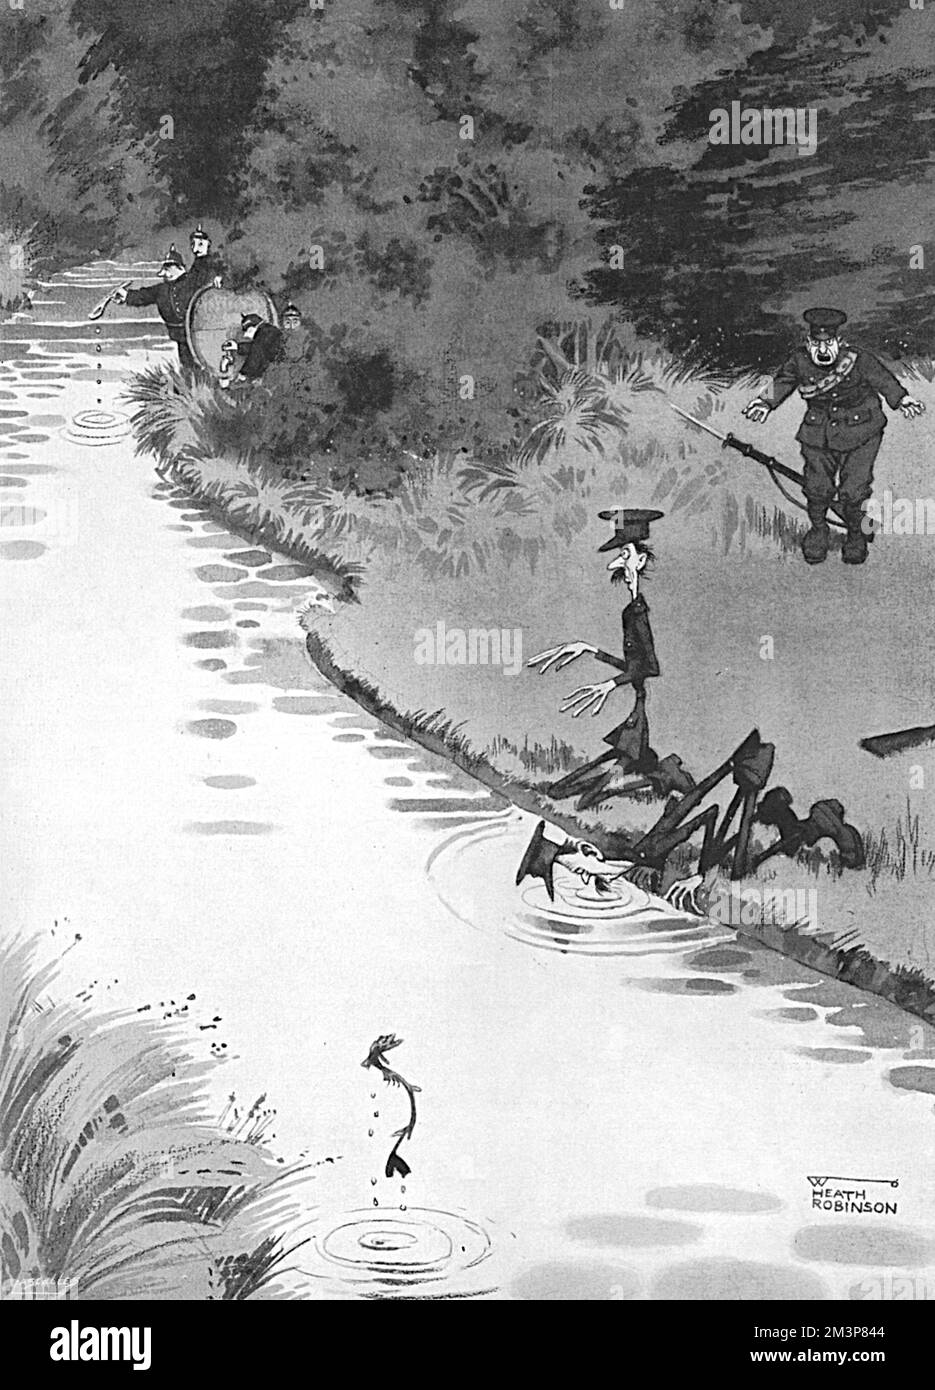 X - Reducing the British Army by anti-fatting a tributary of the Marne.  British soldiers undergo severe weight loss after drinking from the River Marne, spiked with anti-fat  preparations by the dreadful Hun.   Another humorous view of life on the Western Front from William Heath Robinson.     Date: 1915 Stock Photo